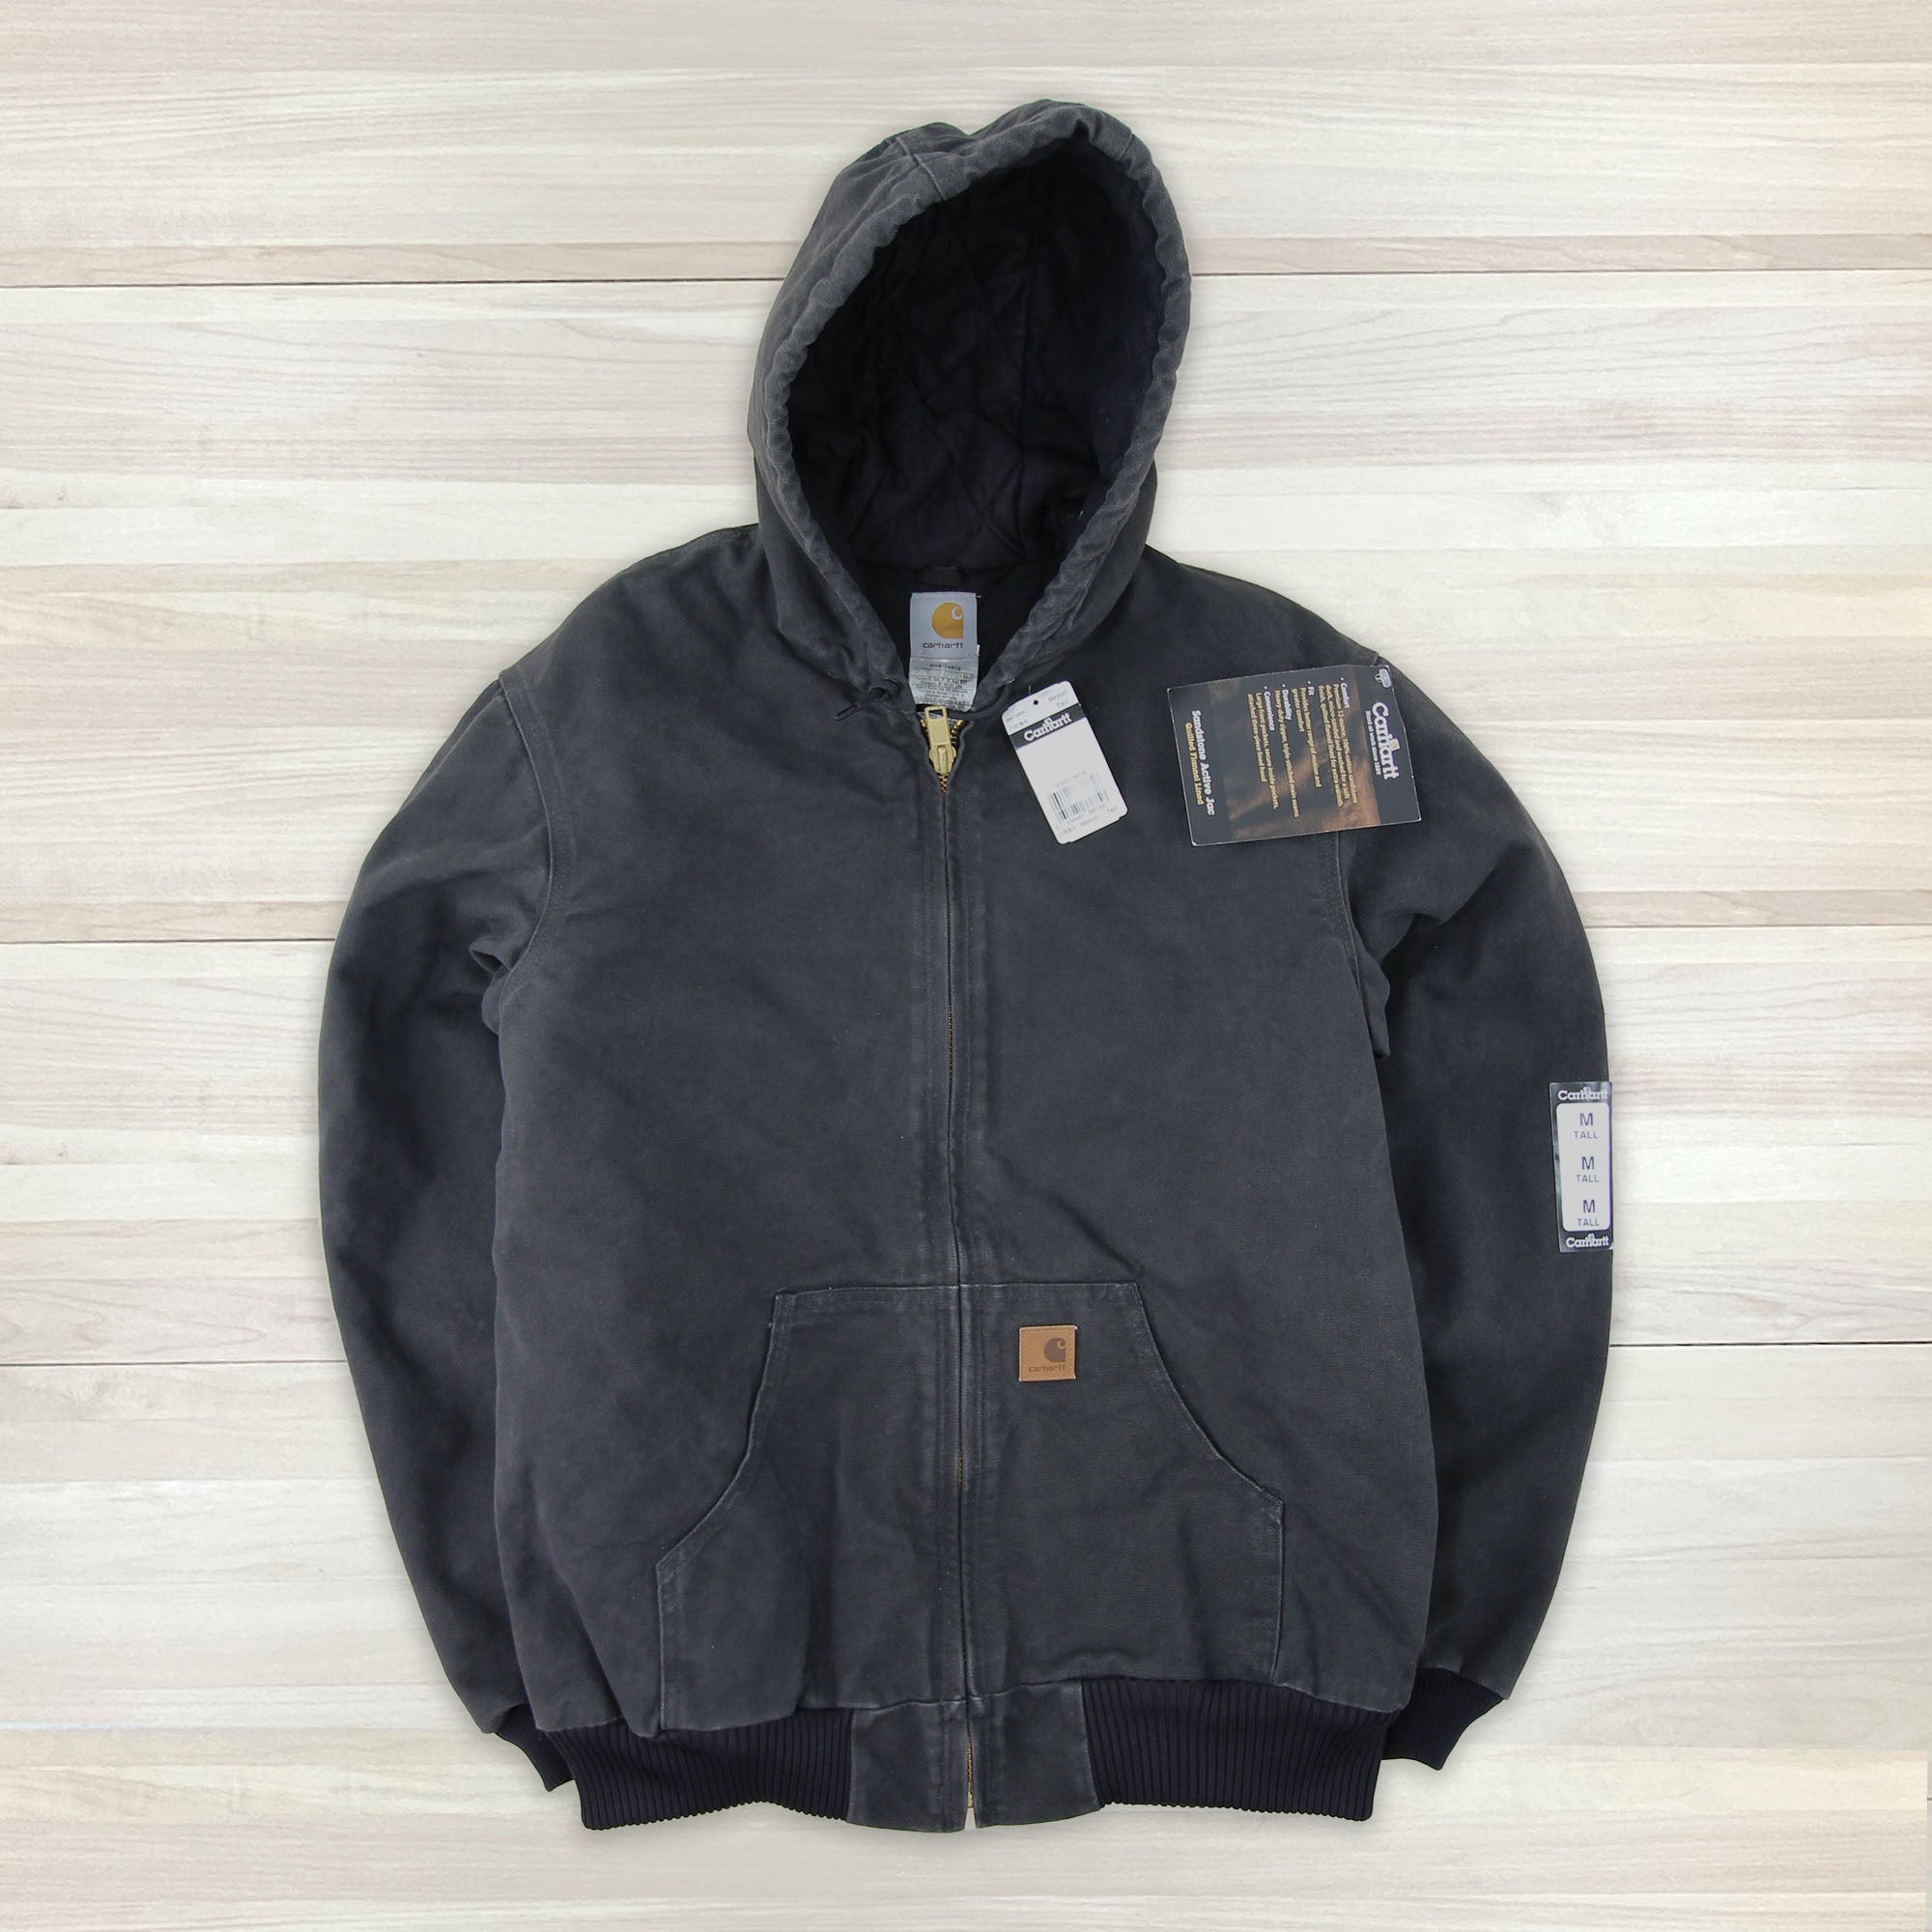 Carhartt 2011 J130 BLK (Black) Quilted Flannel Lined Sandstone Duck Jacket NWT - Medium Tall Great Lakes Reclaimed Denim